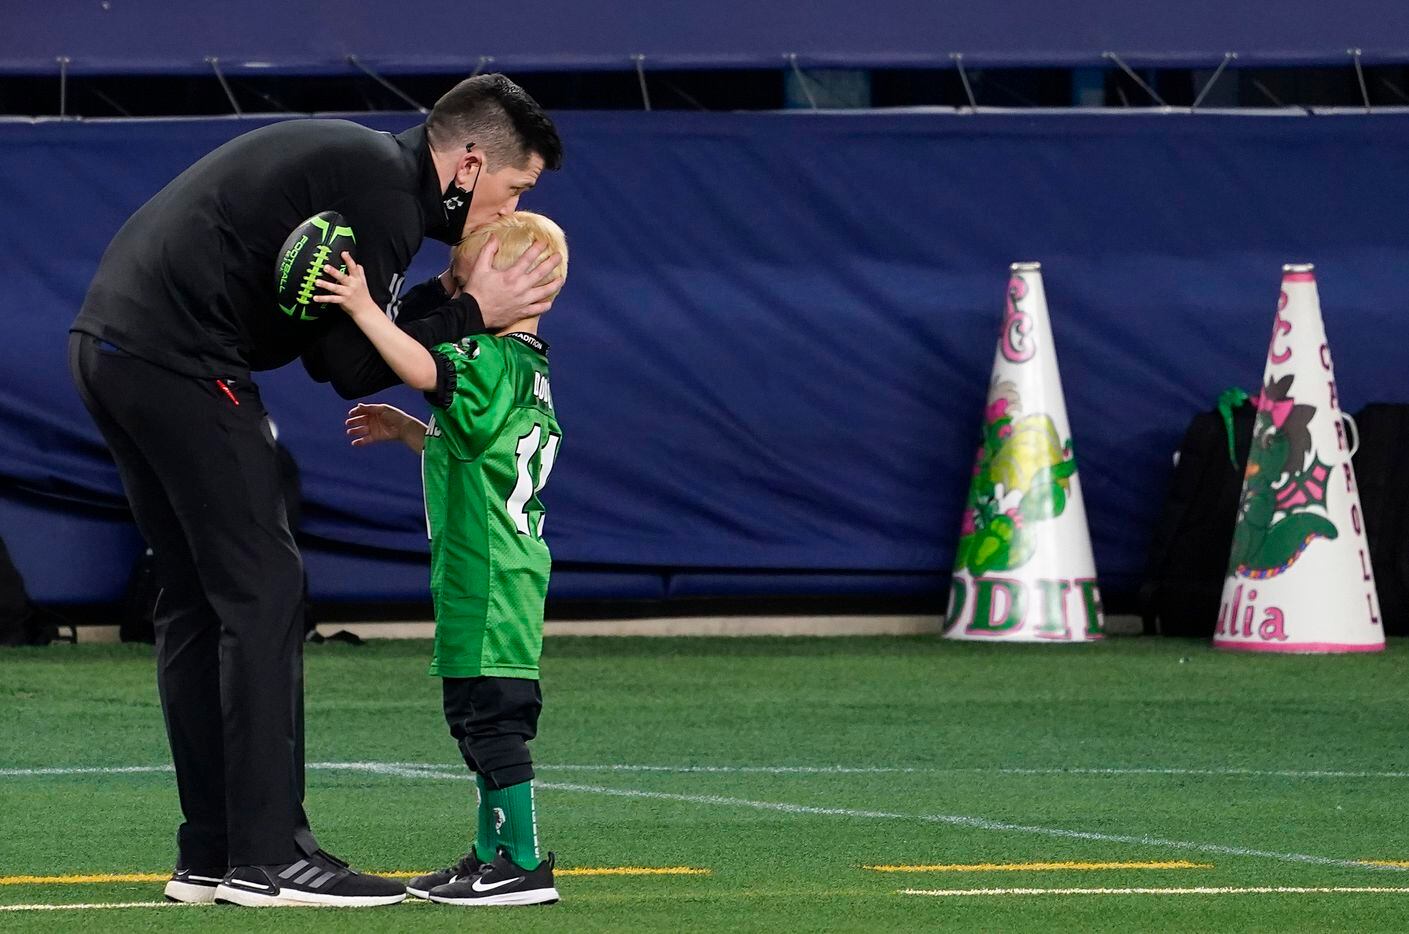 Southlake Carroll head coach Riley Dodge kisses his son Tate, 5, on the sidelines before the Class 6A Division I state football championship game against Austin Westlake, coached by his father Todd Dodge, at AT&T Stadium on Saturday, Jan. 16, 2021, in Arlington, Texas. (Smiley N. Pool/The Dallas Morning News)